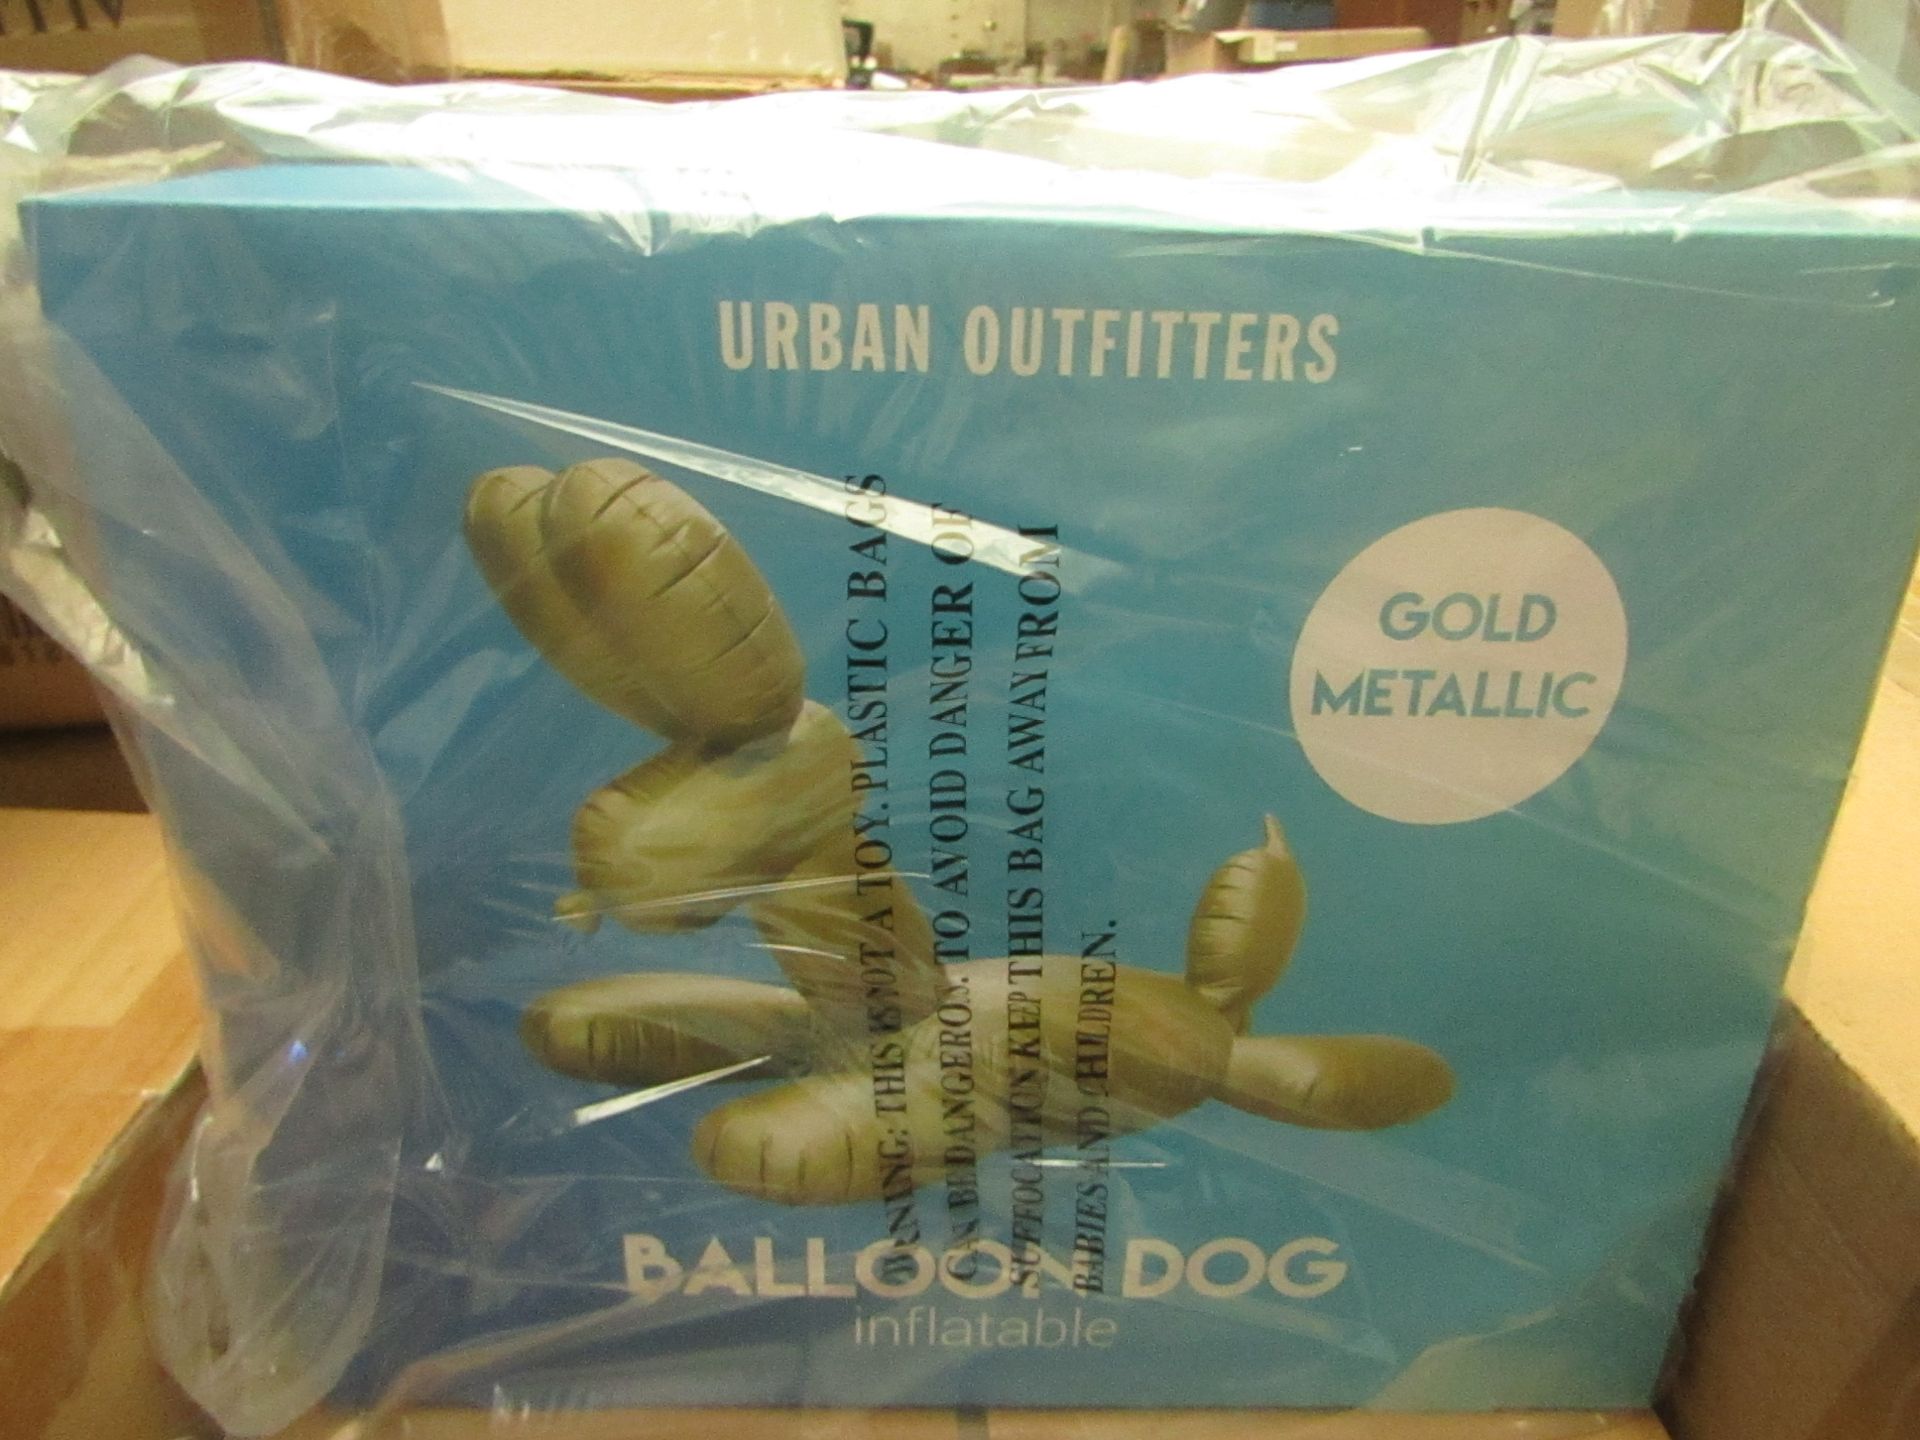 Urban Outfitters - Inflatable Matellic Gold Balloon Dog - New & Boxed. RRP £40.